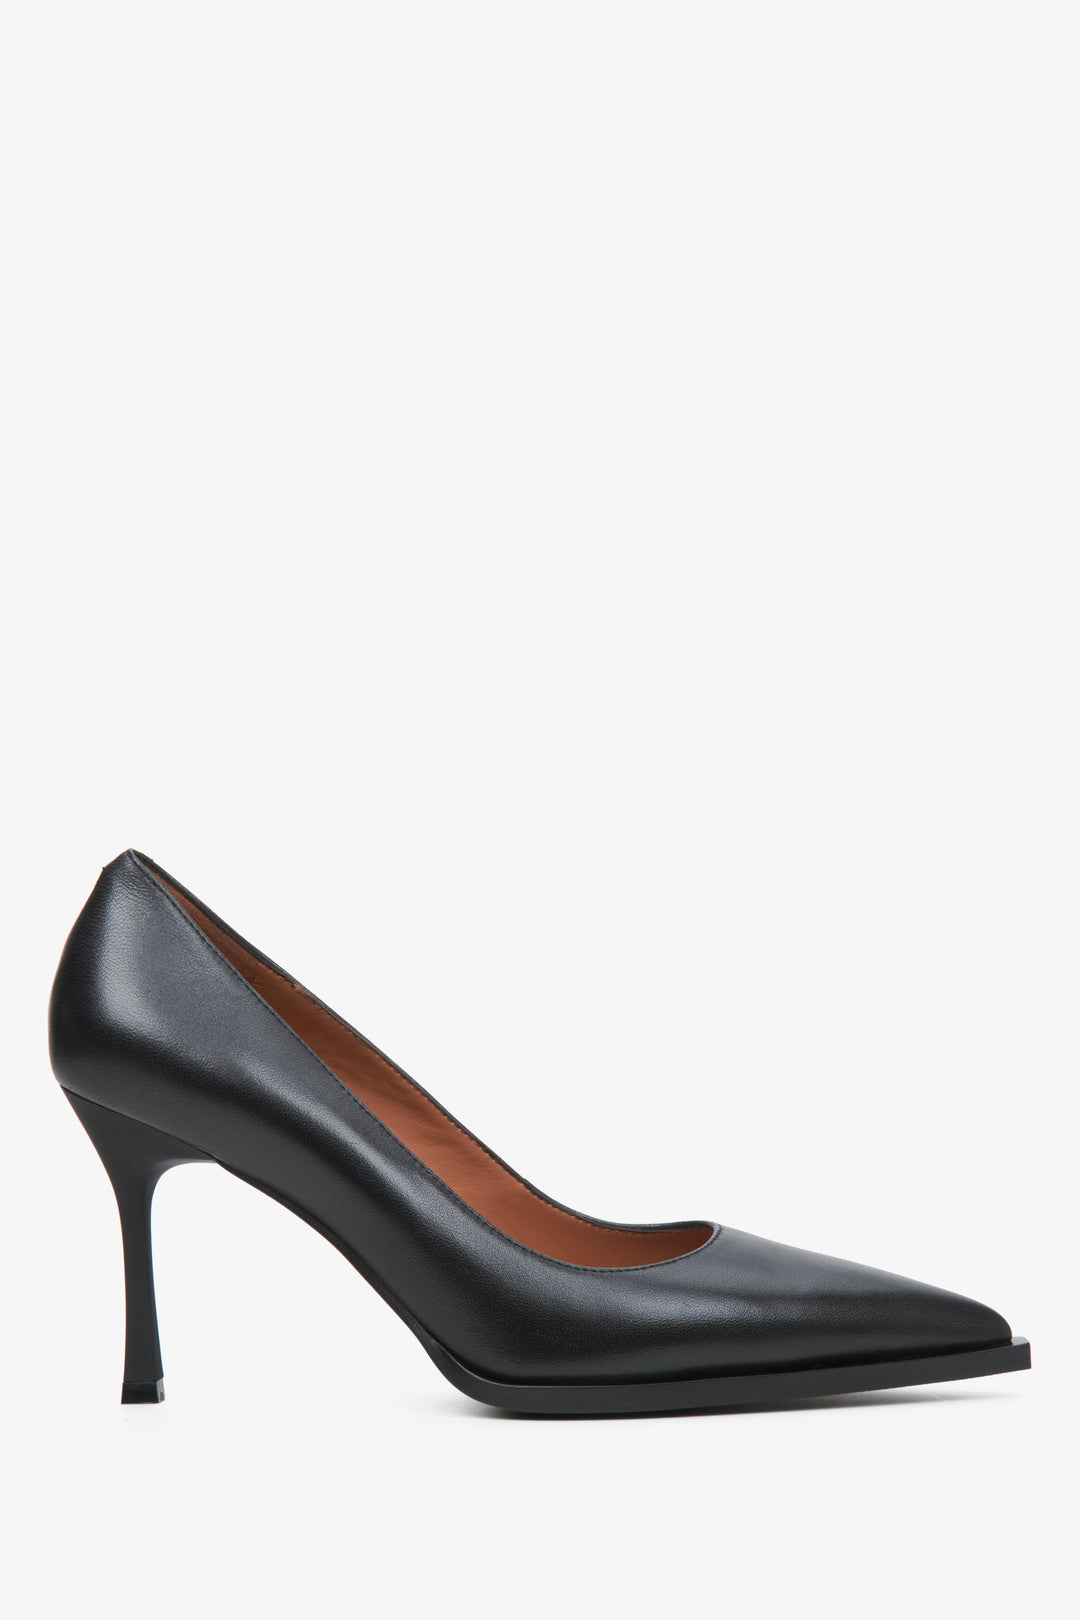 Women's Black Pumps made of Genuine Leather with a Pointed Toe Estro ER00113715.